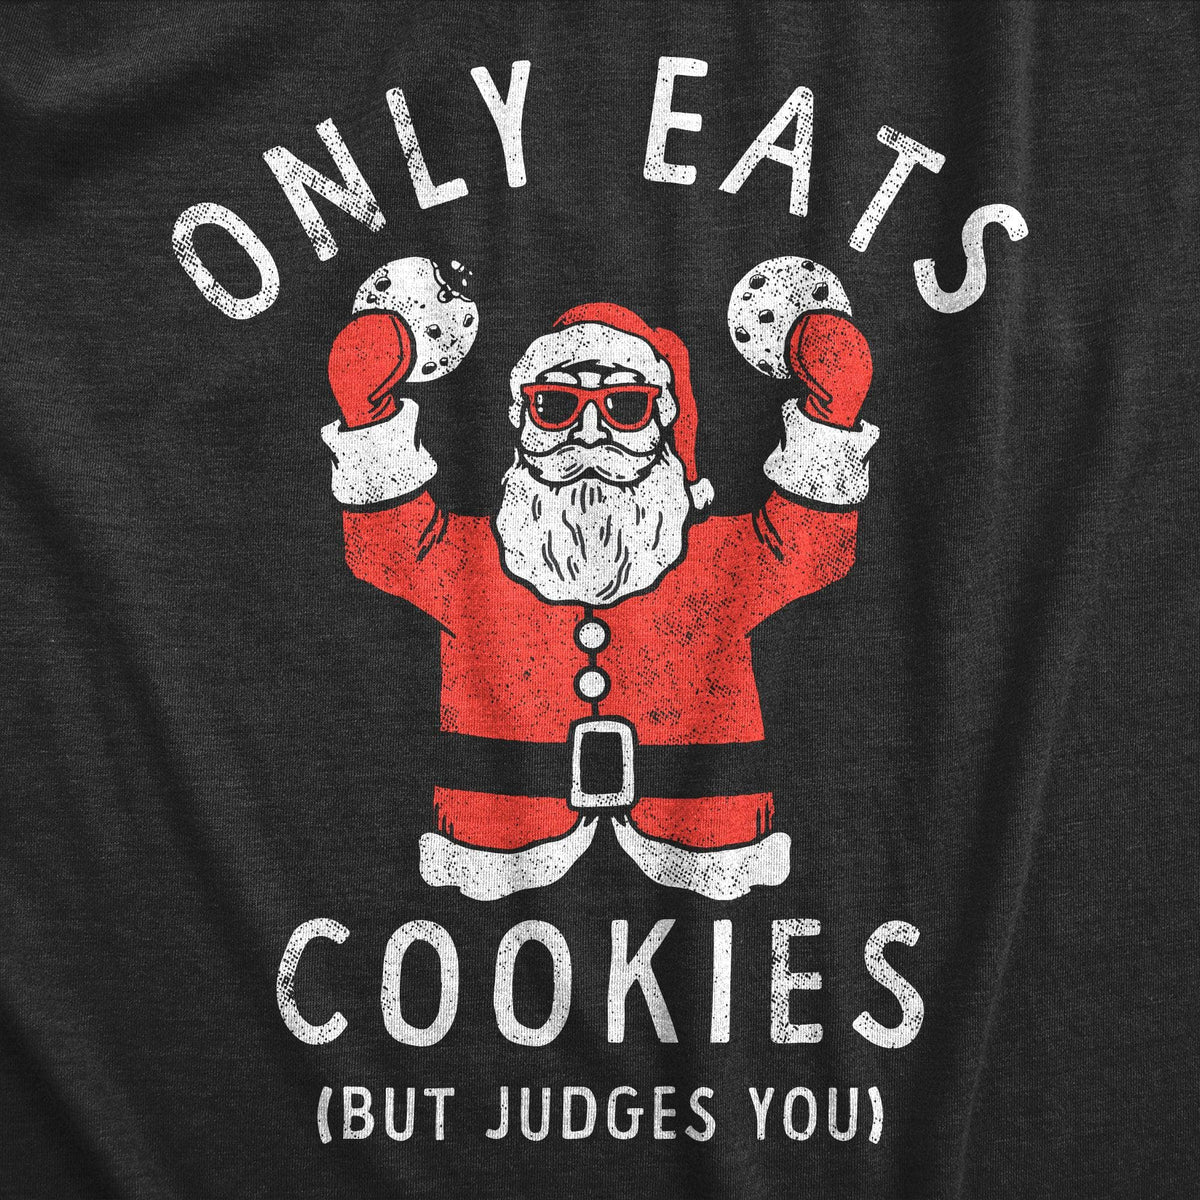 Only Eats Cookies But Judges You Women&#39;s Tshirt  -  Crazy Dog T-Shirts